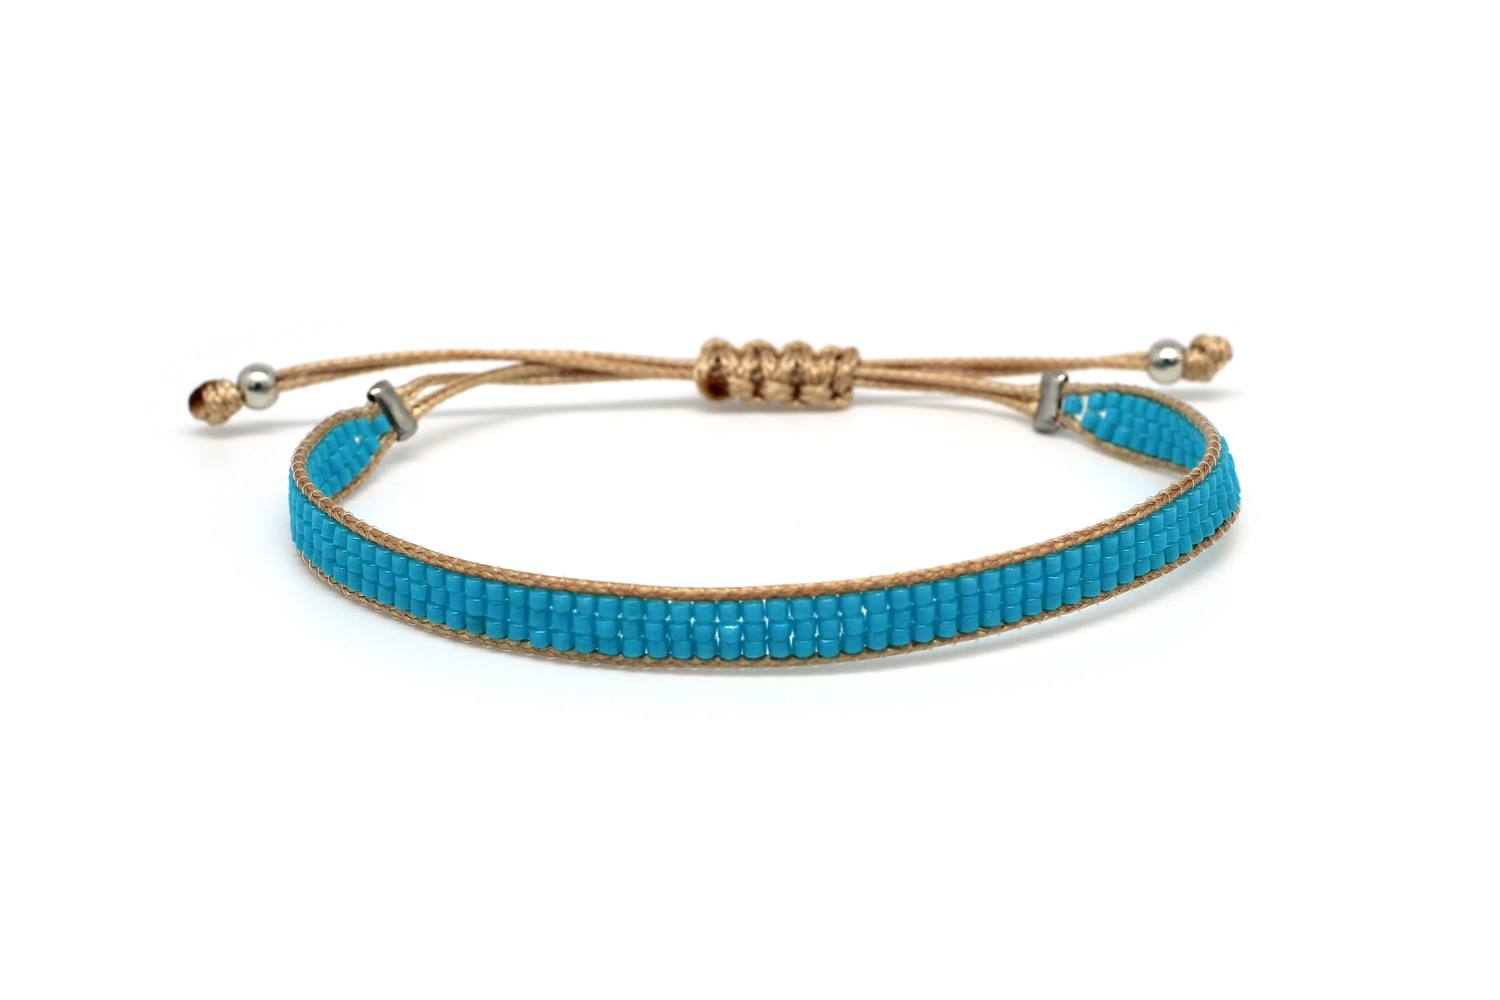 Top more than 85 turquoise friendship bracelet